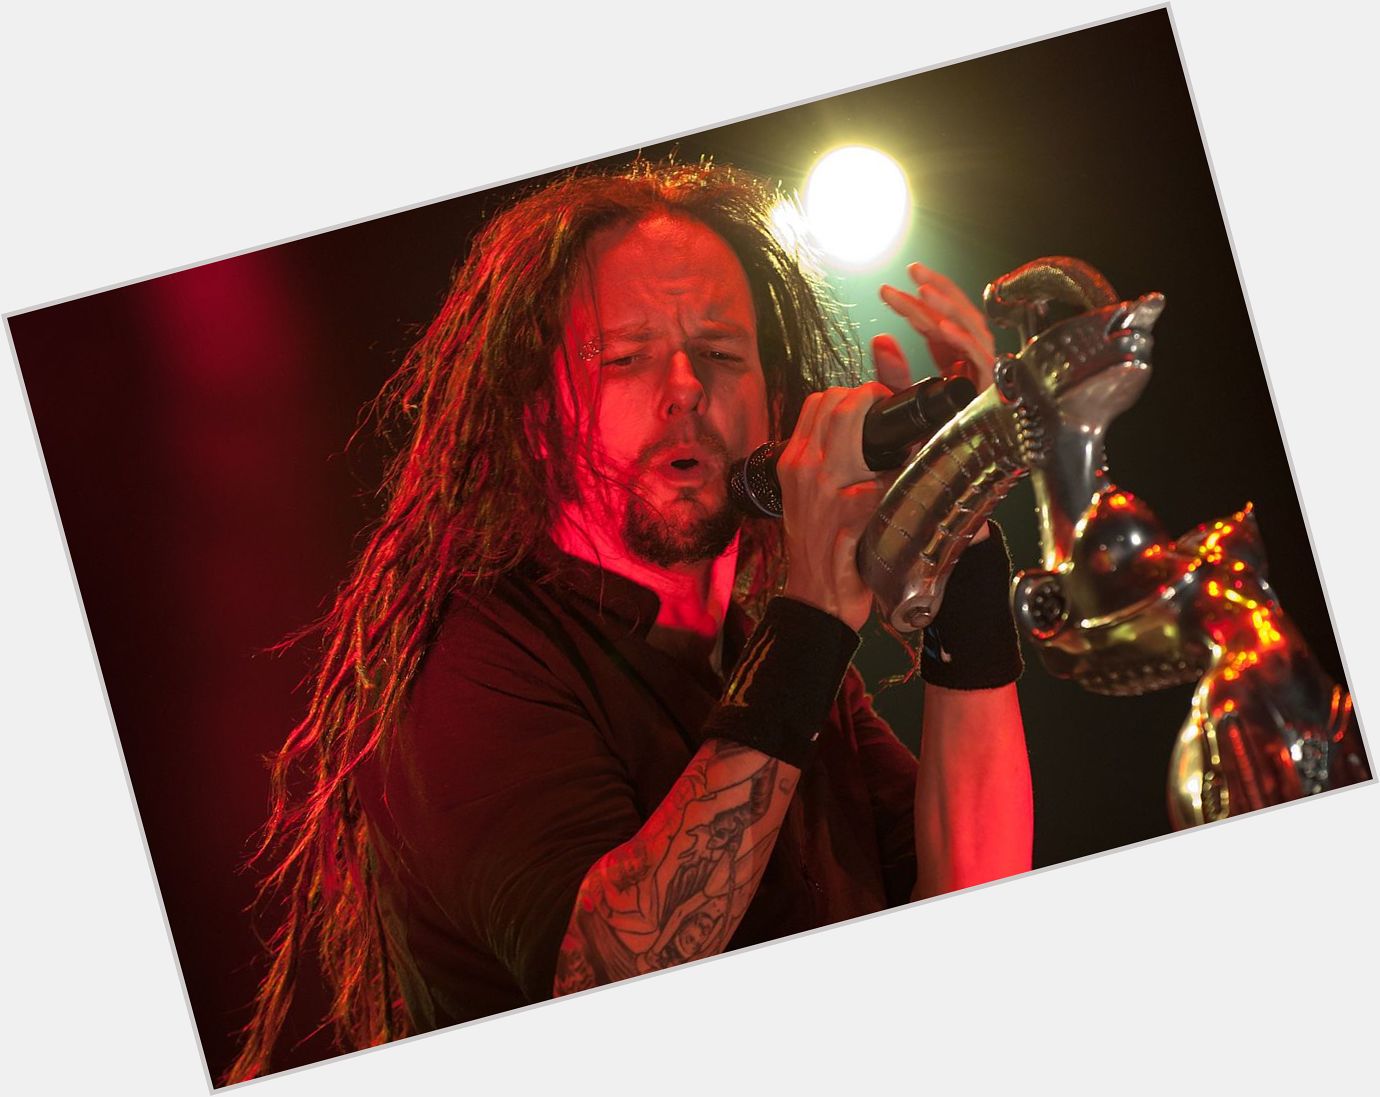 Happy Birthday to Jonathan Davis of - What is your favorite song or album? 